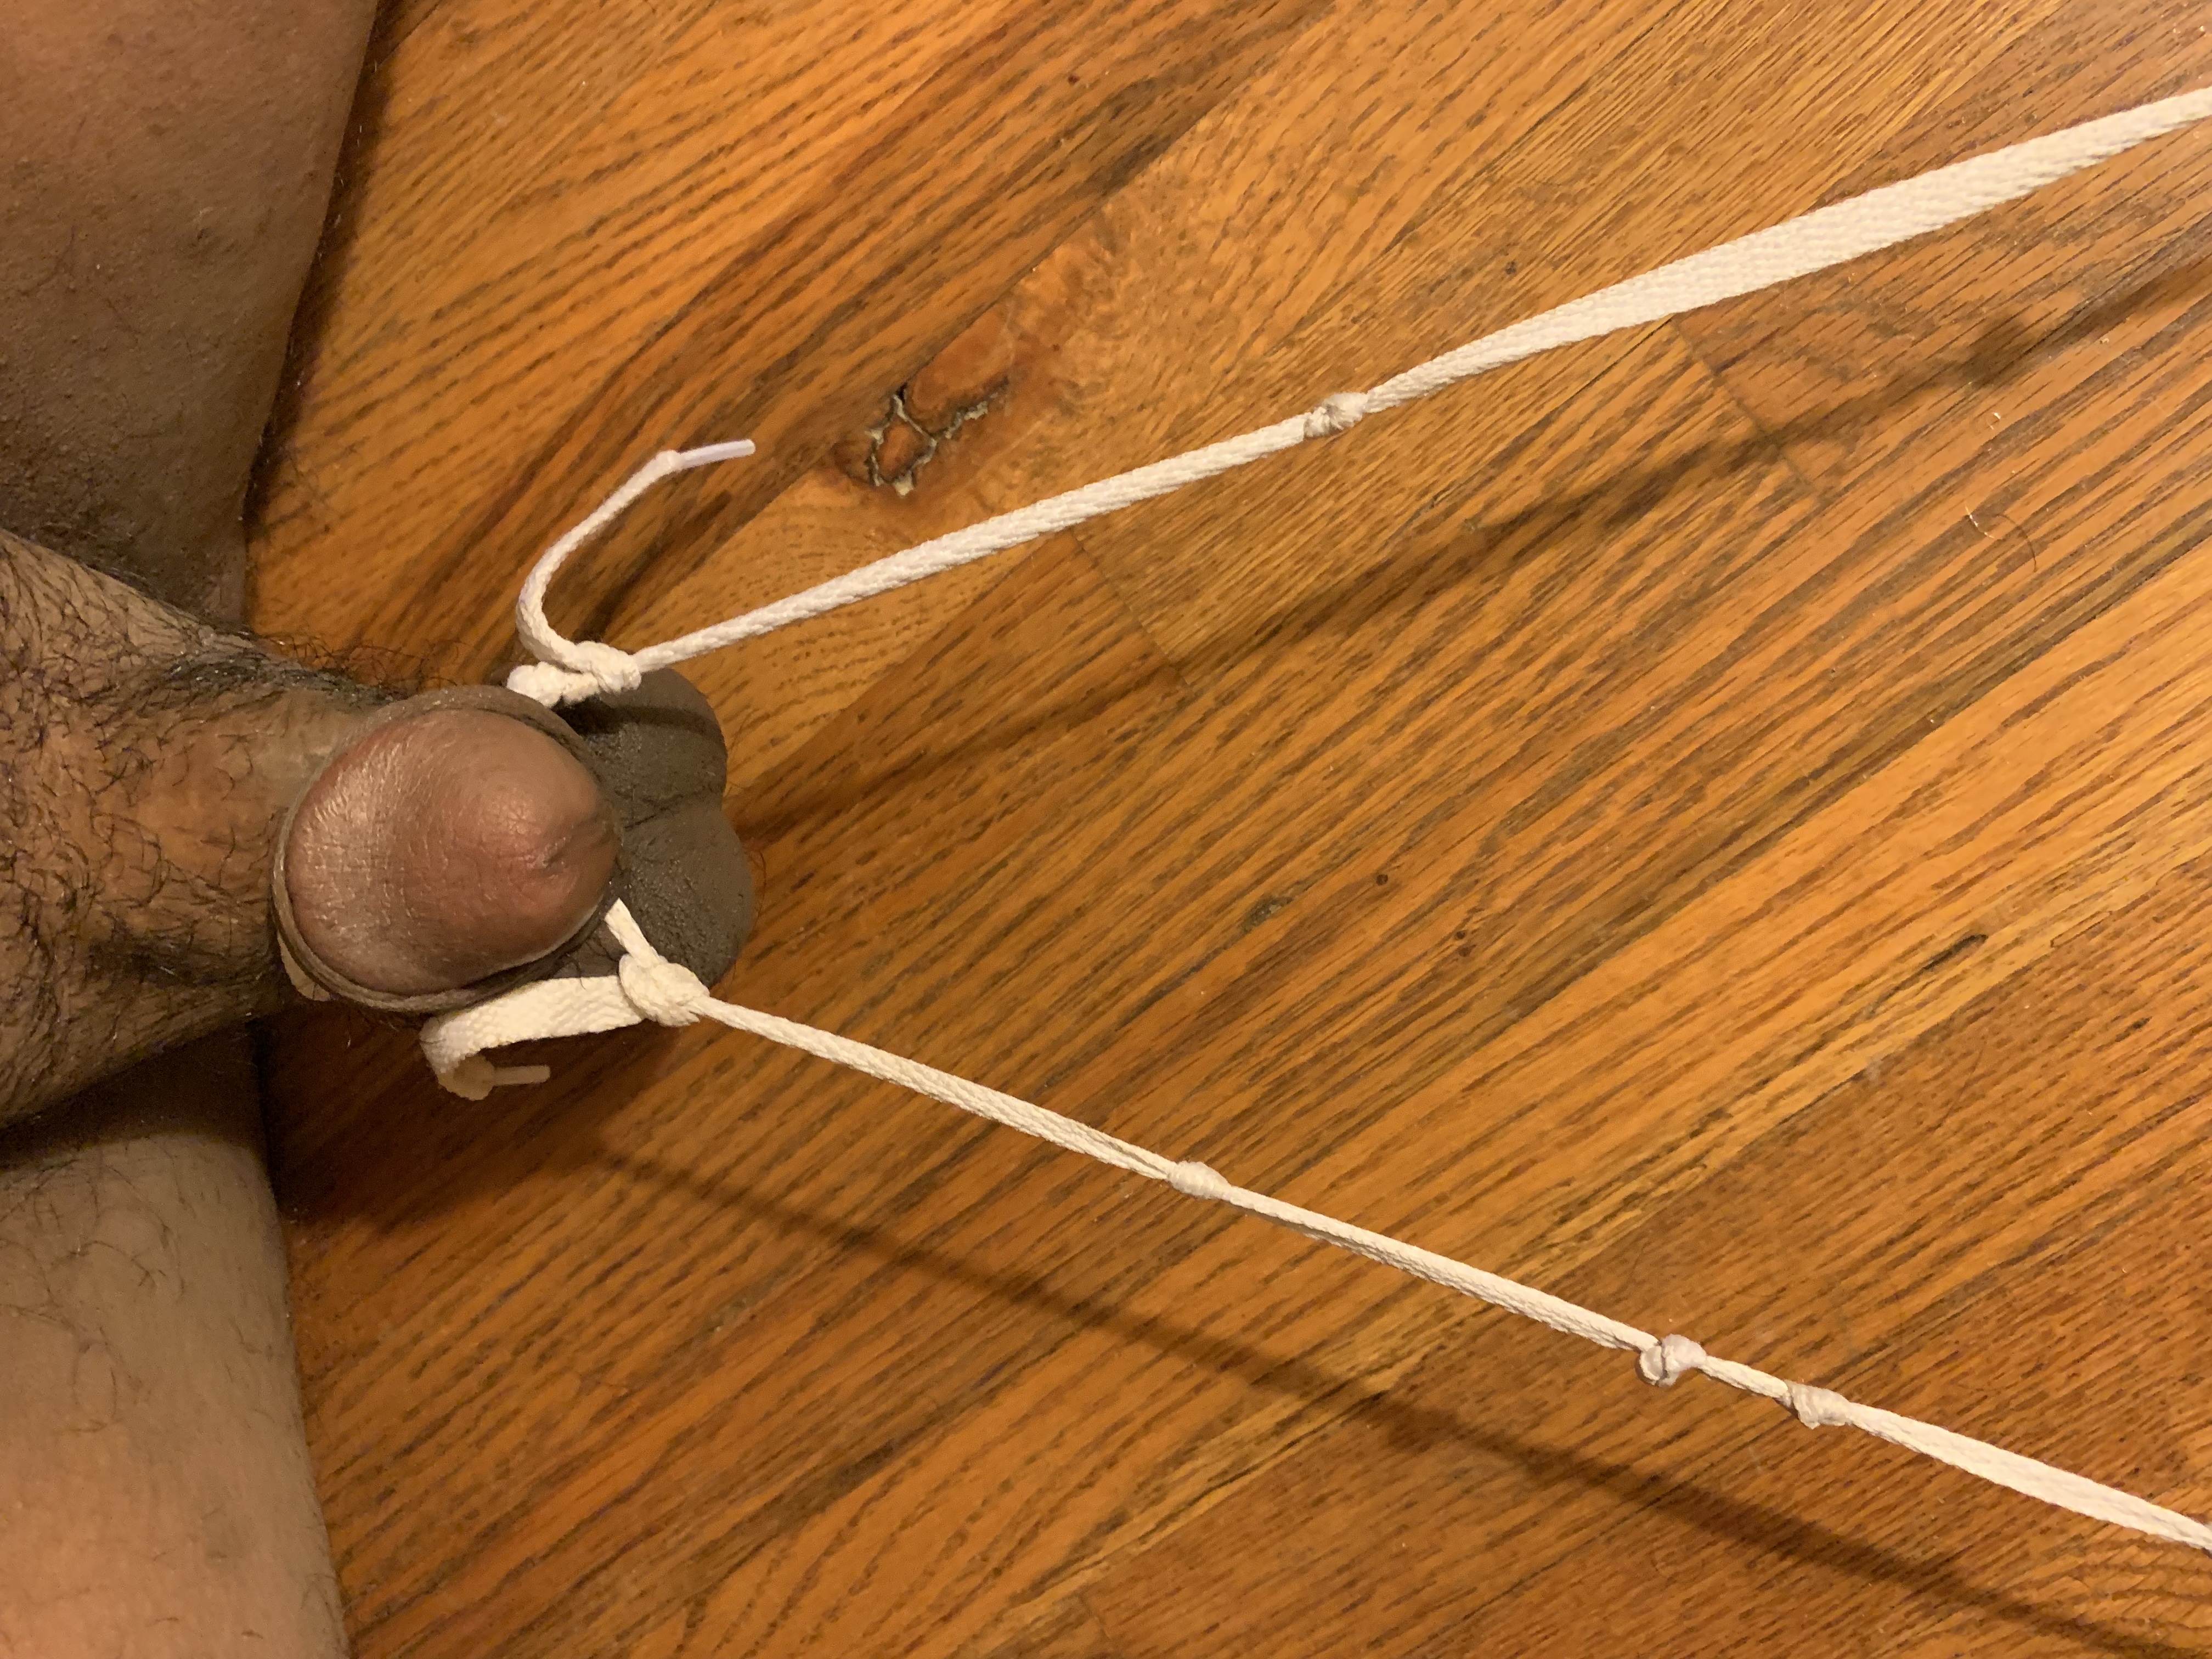 How to tie dick and balls